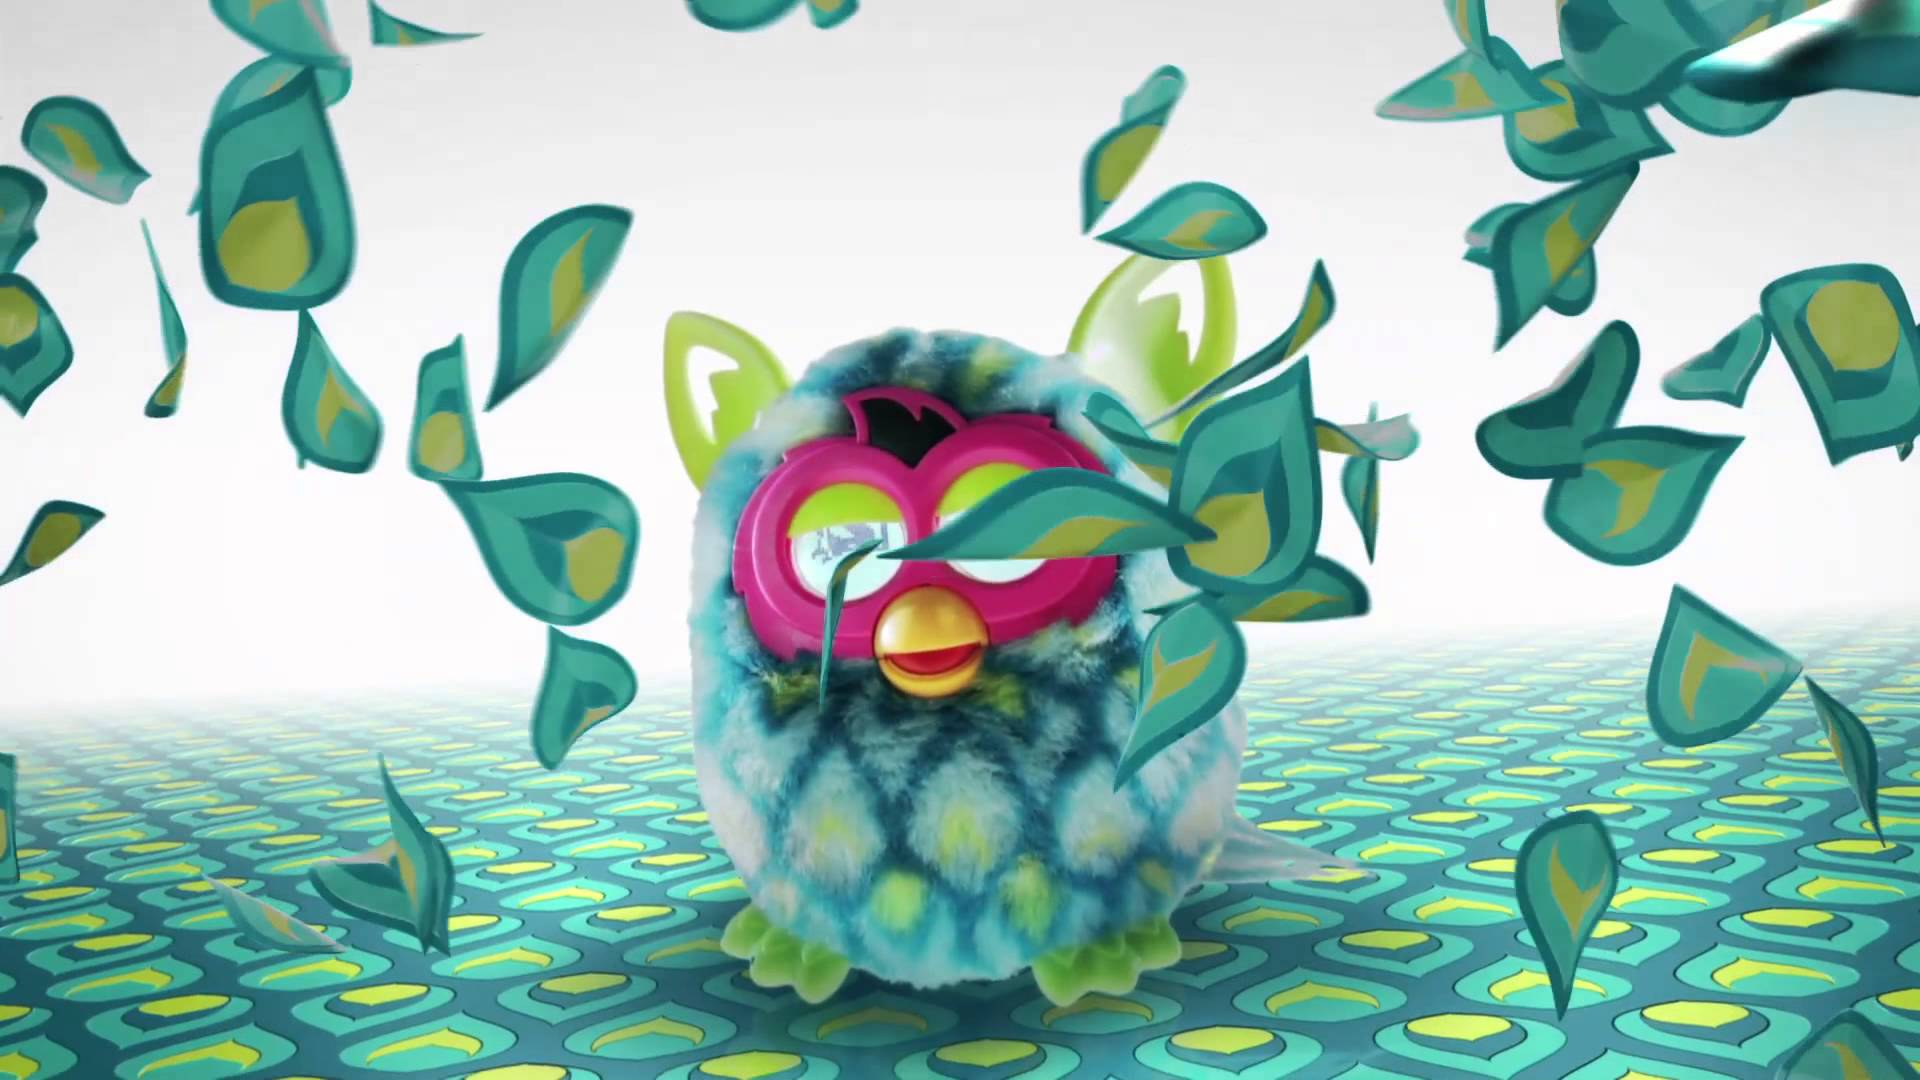 Parents beware Furby is making a comeback